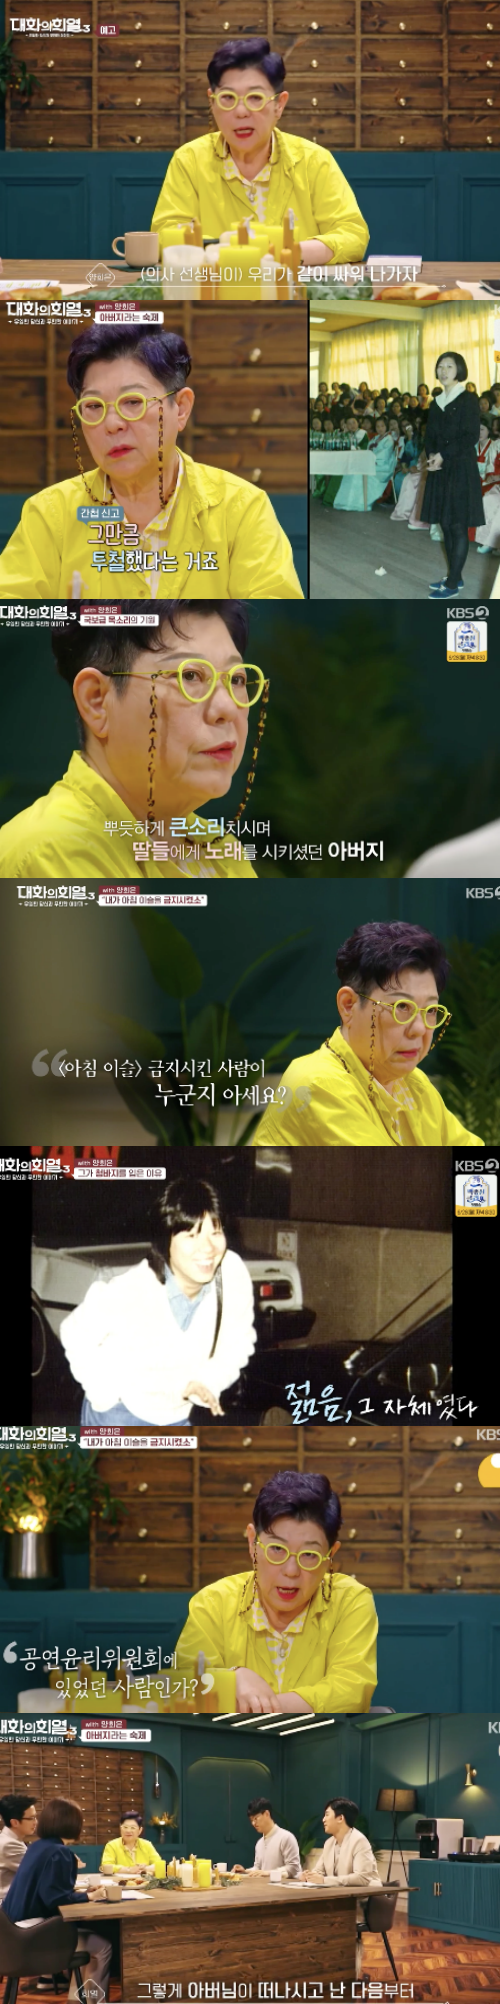 In the Hye-Yeol 3 of Dialogue, Yang Hee-eun predicted an anecdote that was judged to be three months in the end of the ovarian cancer from his childhood when he was the girl.Singer Yang Hee-eun appeared on KBS 2TV entertainment The Joy Season 3 of Dialogue broadcast on the 24th.Yang Hee-eun, who visited the Gong frog in Myong-dong, recalled the days of his life, saying, It was a house of young people who could not go, one day Friend wrote my name on the note that there was a best friend in school, and I was singing on the stage. I was surprised.In the meantime, Kim Min-ki, Seo Yoo-seok, said the senior who was giving it to him, and You Hee-yeol was surprised that it is the beginning of Korean music ties.Yang Hee-eun, who visited Kim Min-ki small concert, said, I first wanted to learn the song Morning Dew, and after the performance, my cleaning lady had a torn score and I got it and practiced it alone at home.Yang Hee-eun, who had lived in poverty at the time, said, I have never dreamed of being a singer, and I walked the path of Singer to get out of my life.I wish I could sing Morning Dew on my first album, and Kim Min-ki allowed me to, Yang Hee-eun said. When I never thought about the song becoming a currency, there were years of how to sing for money.In the meantime, he said that he was born with 10 songs in the first album.In 1971, he asked about the reaction of Yang Hee-euns first album, the first album.One day, on the radio, I heard a morning dew on the bus, and I was so surprised, but it didnt sound like my voice, I couldnt forget it, no one knew me, but my heart was pounding, Yang Hee-eun said.Yang Hee-eun, who has worked with Kim Min-ki for a lot of songs since then, said that famous songs were poured in 72 years.When asked what Kim Min-ki was like to Yang Hee-eun, he said, My idol, all of it, shone like a star. Unlike romantic lyrics, it was a song that had to be called for a living, but you kept clear without compromising music and reality.I realized that the position I was standing in was different later.Yang Hee-eun was a symbol of Blue Jeans, and he recalled, I did not have the power to handle stockings, I was from a family that was completely ruined because of the difficulty of stockings that I often go out in difficult circumstances.Yang Hee-eun said, There were some seniors who were angry that they were polite, saying that they dared to come up on stage wearing sneakers and blue jeans. There is an emotion that was such a sacred place.Anyway, the first woman in Blue Jeans, whatever she said, was Blue Jeans, Yang Hee-eun said. I didnt have to dress because the guitar was covered up.Yang Hee-eun went on to confess that he was the girl, saying his father died in two years due to liver deterioration.Yang Hee-eun said, My father died at the age of 13, and the time left with my stepmother was harder, and the conflict was severe.Yang Hee-eun, who was wandering even more after his father died as a high school girl, said, I went to my fathers oxygen and reported the Spies, and I was taken to the police station to check my identity. I do not believe that I went to my fathers oxygen.It was an absurd case that Misunderstood with The Spies.Yang Hee-eun said, I went to Song Chang-sik on the day of the bad news, asked me to go to the live cafe of Lee Jong-hwan and I passed the audition. After that, I asked for a payment, and I received a salary of 40,000 won,On the stage that Song Chang-sik gave up for 10 minutes, Yang Hee-eun expressed his gratitude to Song Chang-sik, who recognized himself as the only person who recommended someone is the first and last person who should have sang, whether the house is ruined or not.You Hee-yeol was surprised that Song Chang-sik also found Yang Hee-eun, a similar situation, who was homeless at school when there was no contact theft at the time.I had no hope, Yang Hee-eun said, the amount of debt was two houses, and I had no hope. When I sing like a days stamp, I never touched the money because I took it under the pressure, so I had a nickname and a right to recover it, but those times were manure.If you have a fathers soul, I believe you will protect me, and I have a great power, Yang Hee-eun said, I was afraid, but I thought others were scared. You Hee-yeol said, Im sad, Im sick.On the other hand, while referring to Myeong-dong Obis Cabin and continuing to recall the past, Yang Hee-eun said that morning dew and evergreen water are still unresolved homework.Yang Hee-eun, who had been told by a doctor that he could only live three months at the end of the ovarian cancer, said, The doctor wants to fight, but he does not want to die, he does not want to die, he does not want to live.The Joy of Dialogue 3 Capture